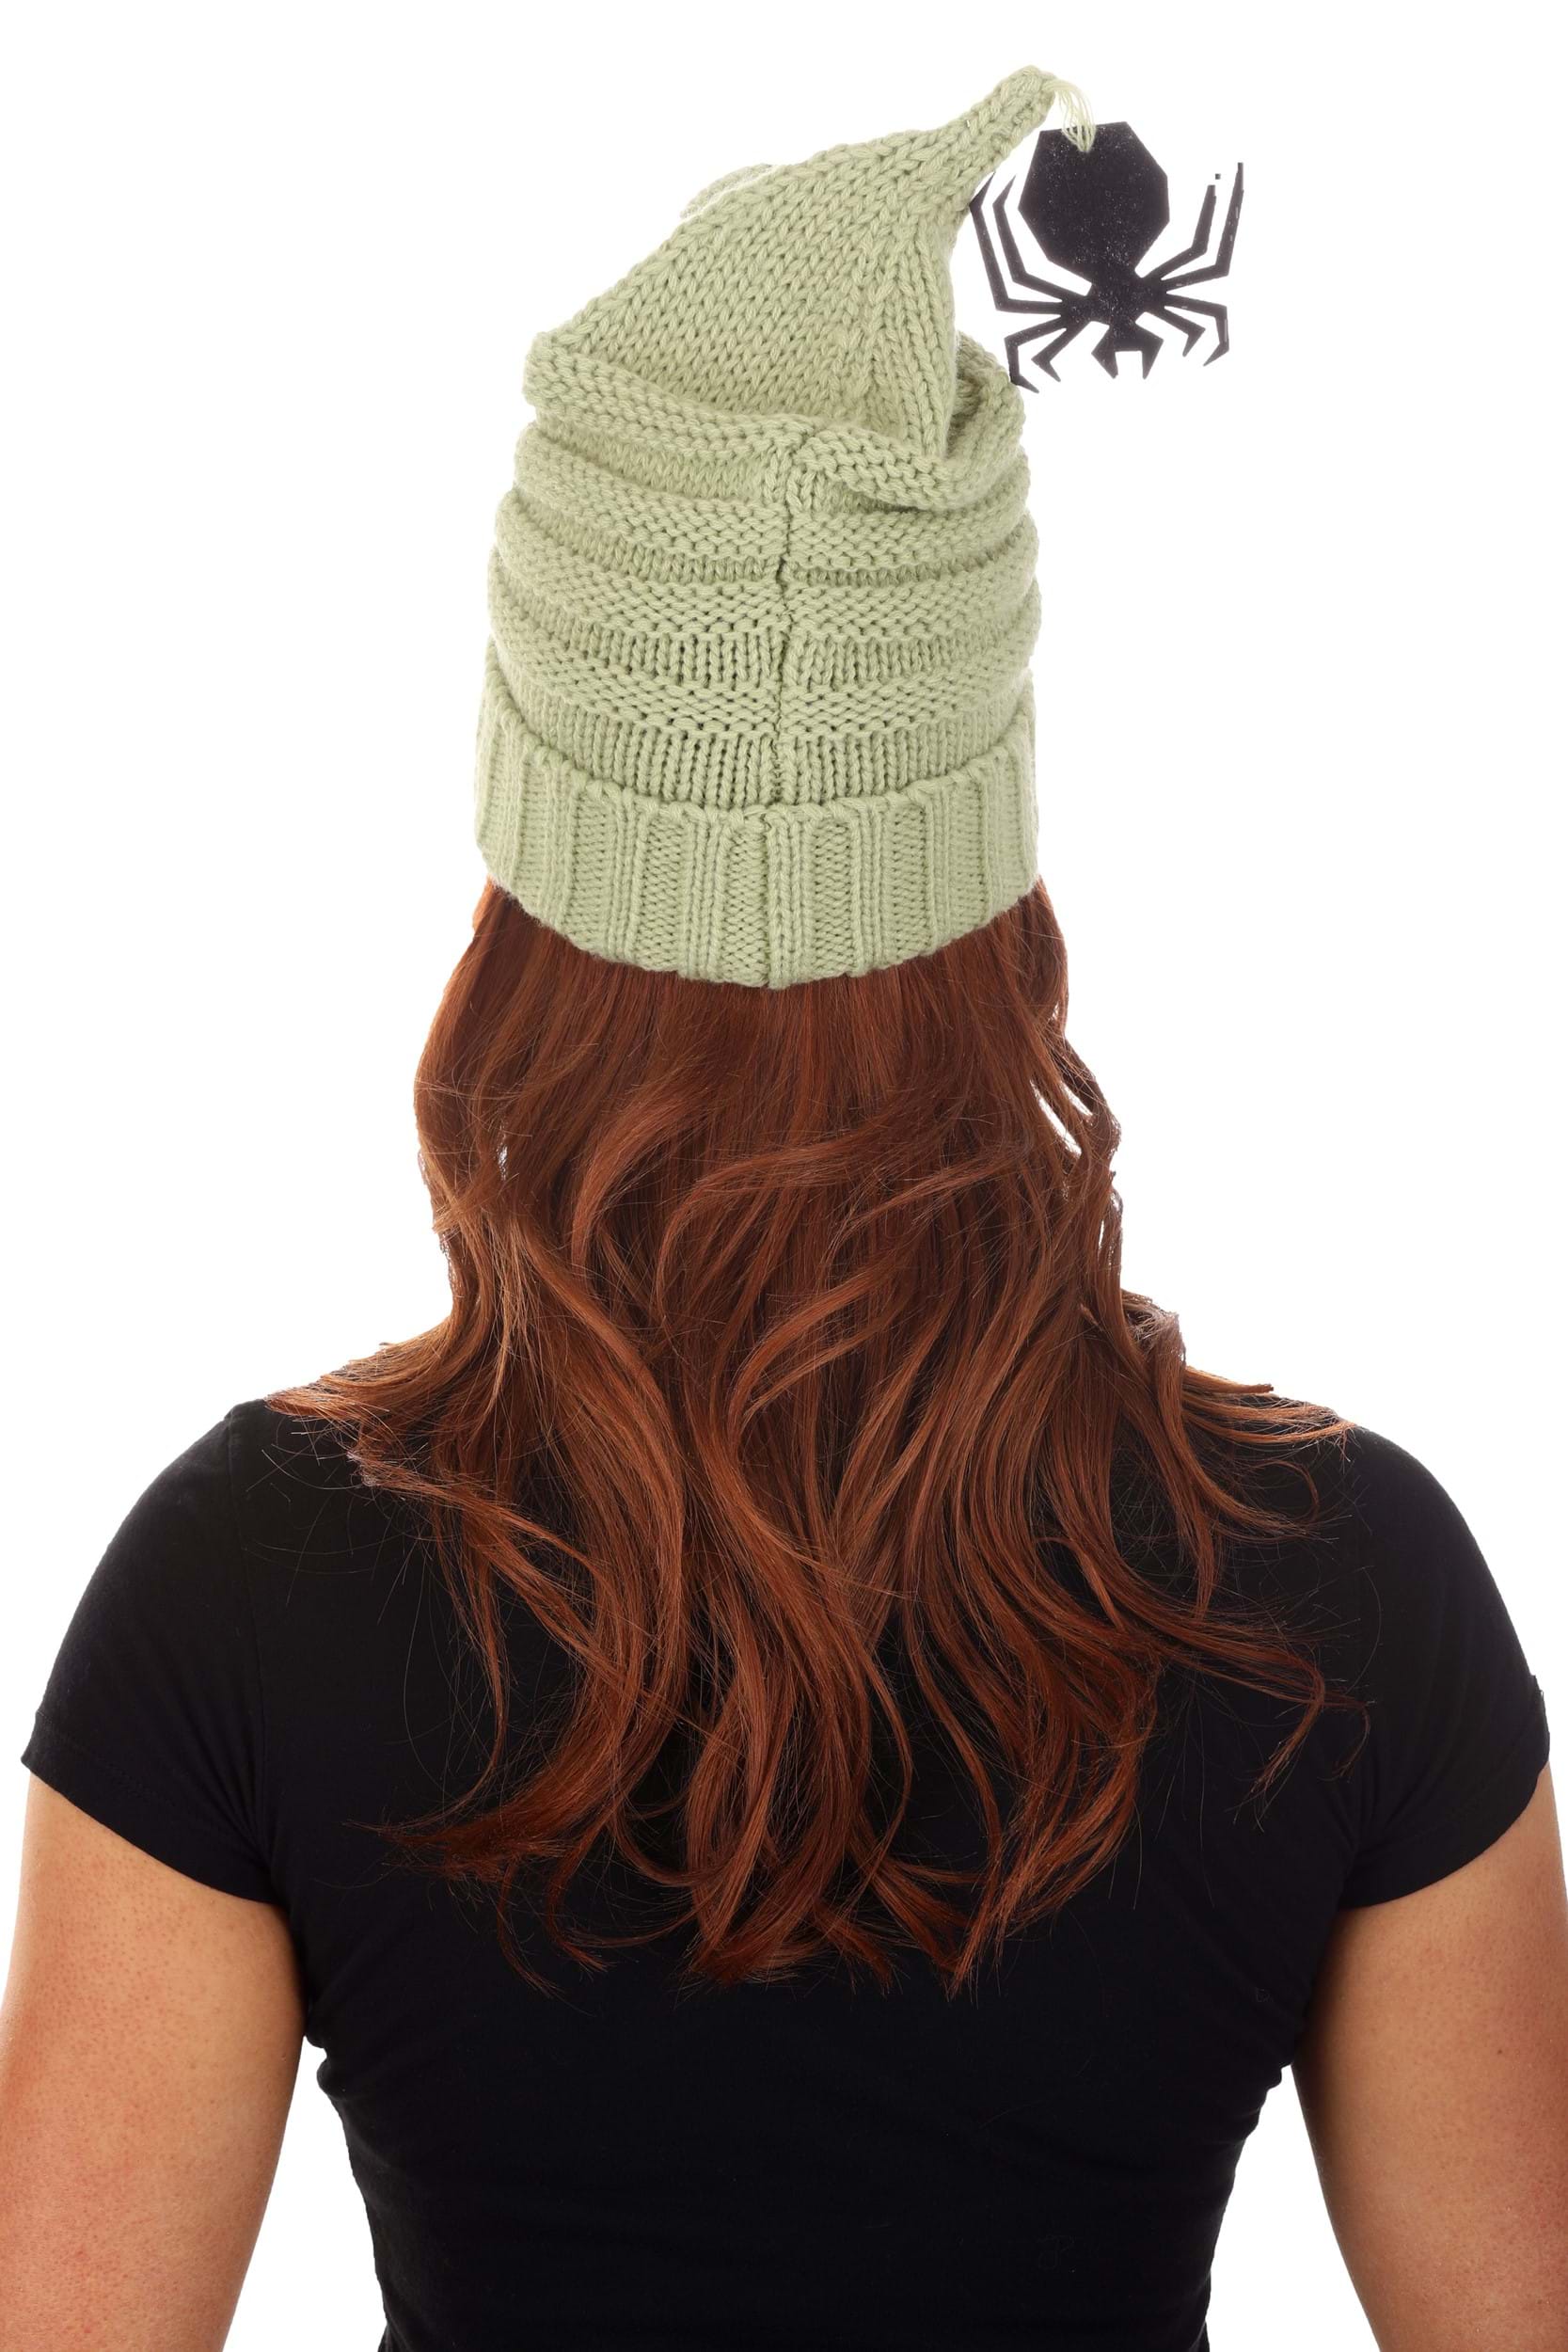 Disney Nightmare Before Christmas Oogie Boogie Knit Hat For Adults